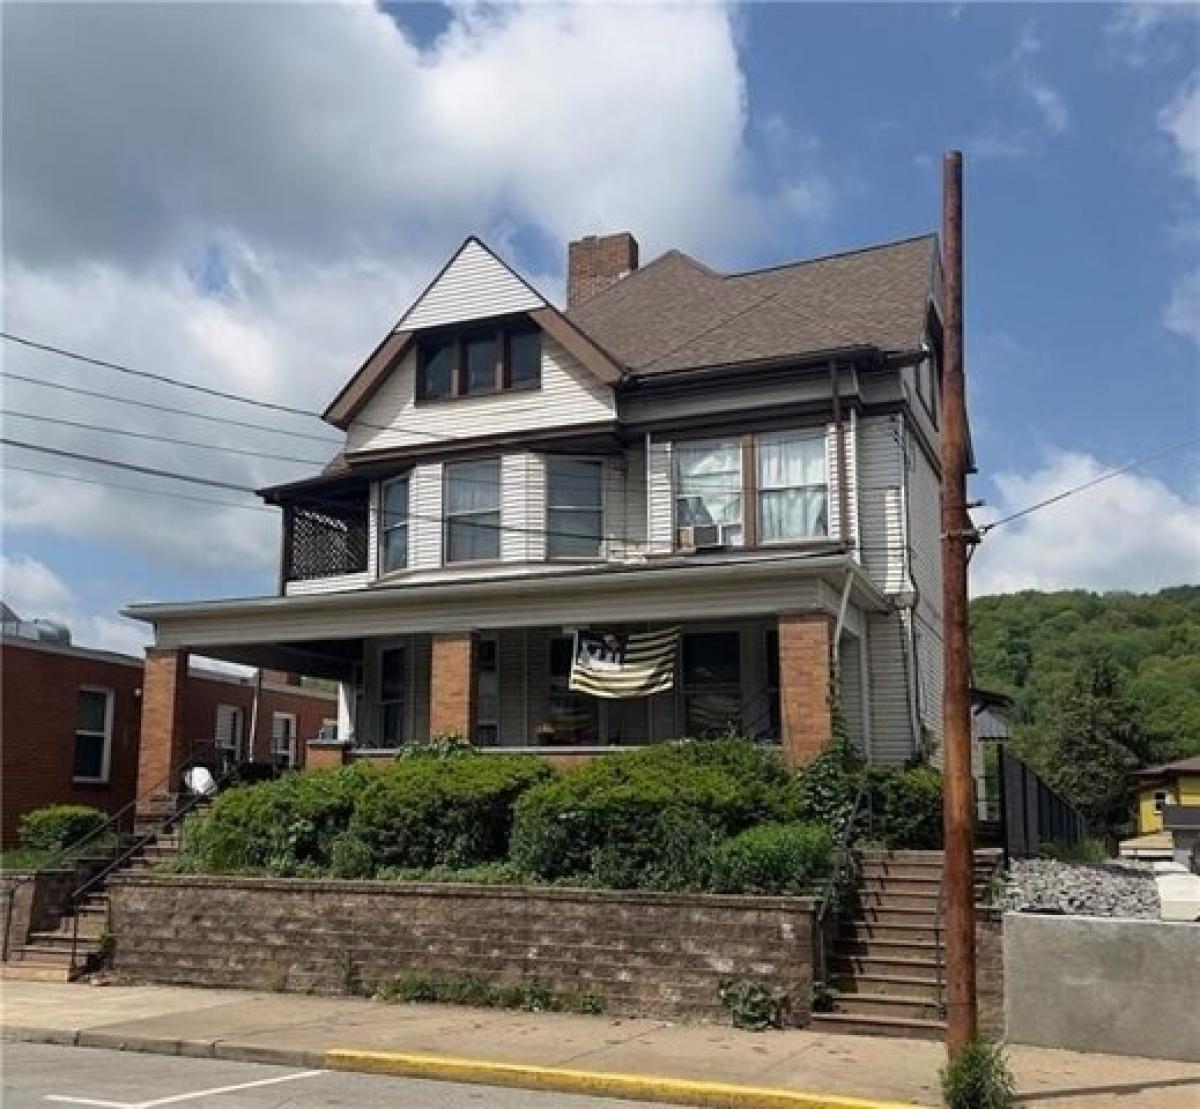 Picture of Home For Sale in Beaver Falls, Pennsylvania, United States